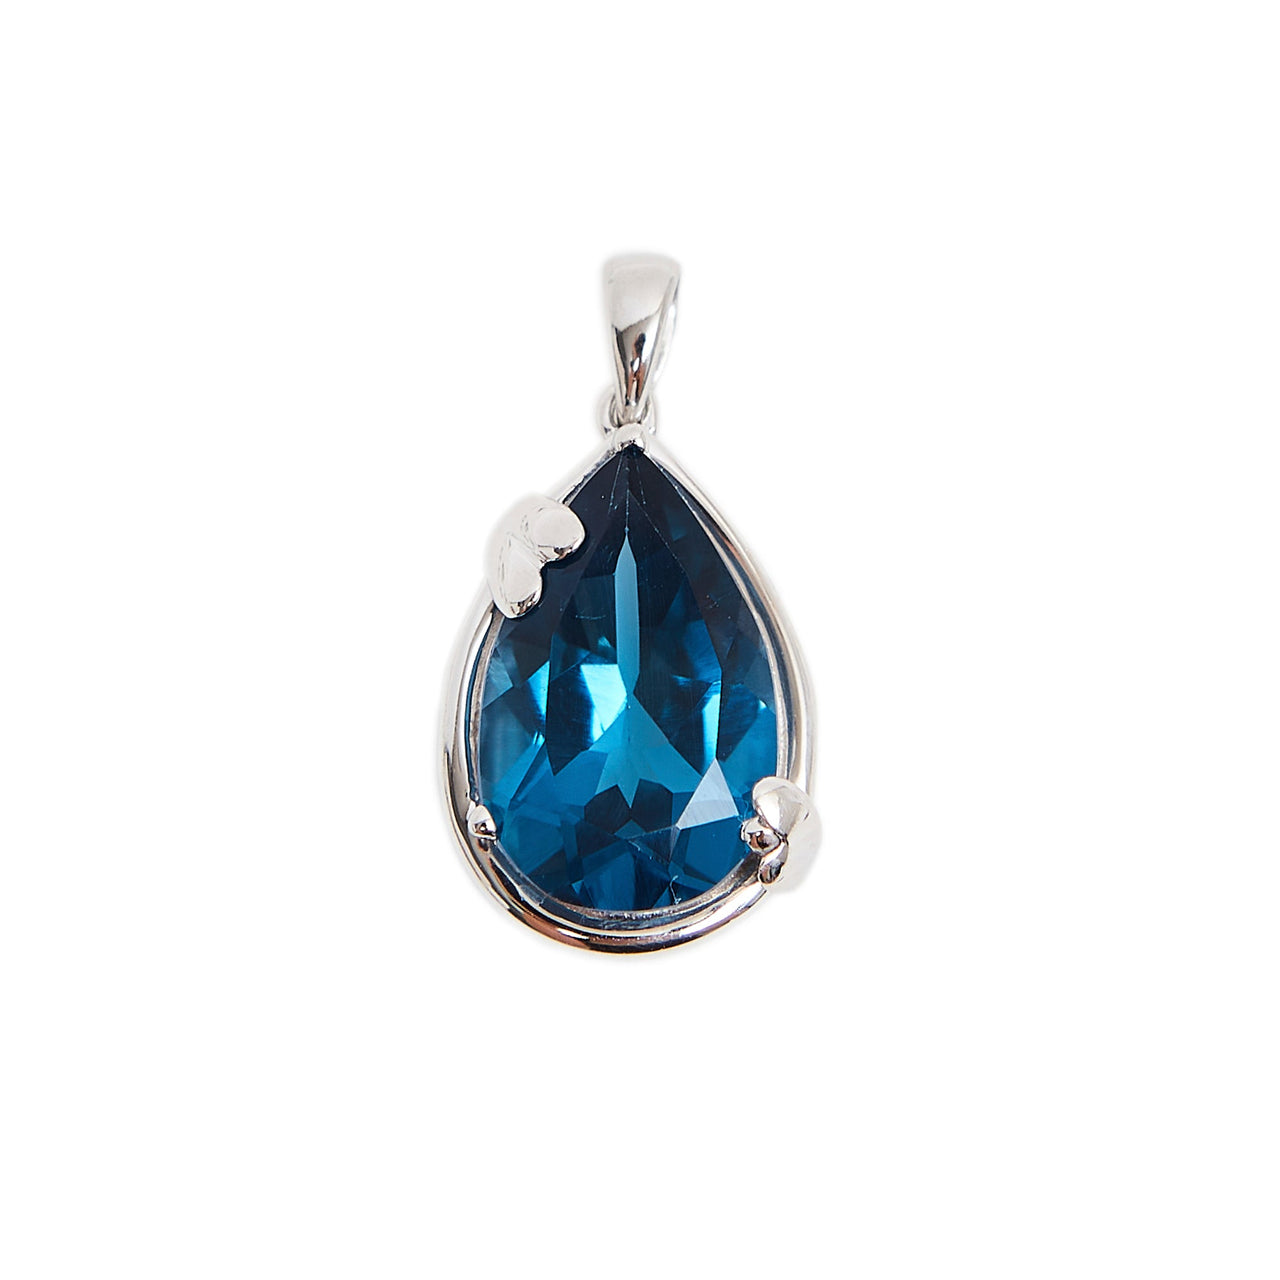 Pre-Owned 9ct White Gold Pear Cut Topaz Pendant